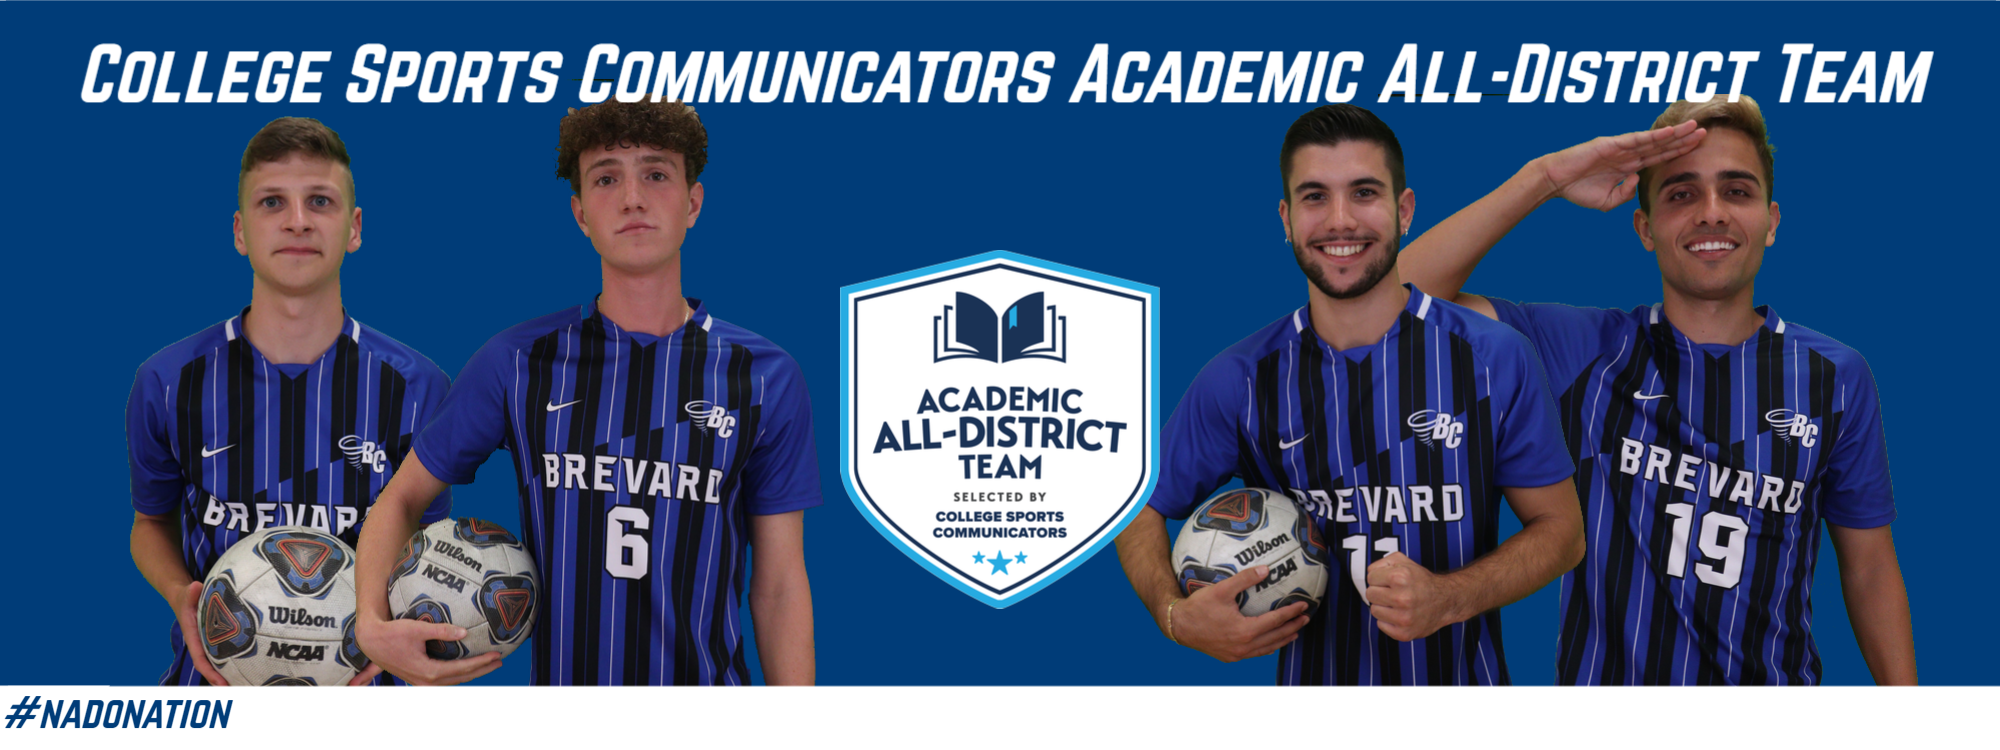 Academic All-District Team Includes Program-Record Four Tornados from BC Men’s Soccer